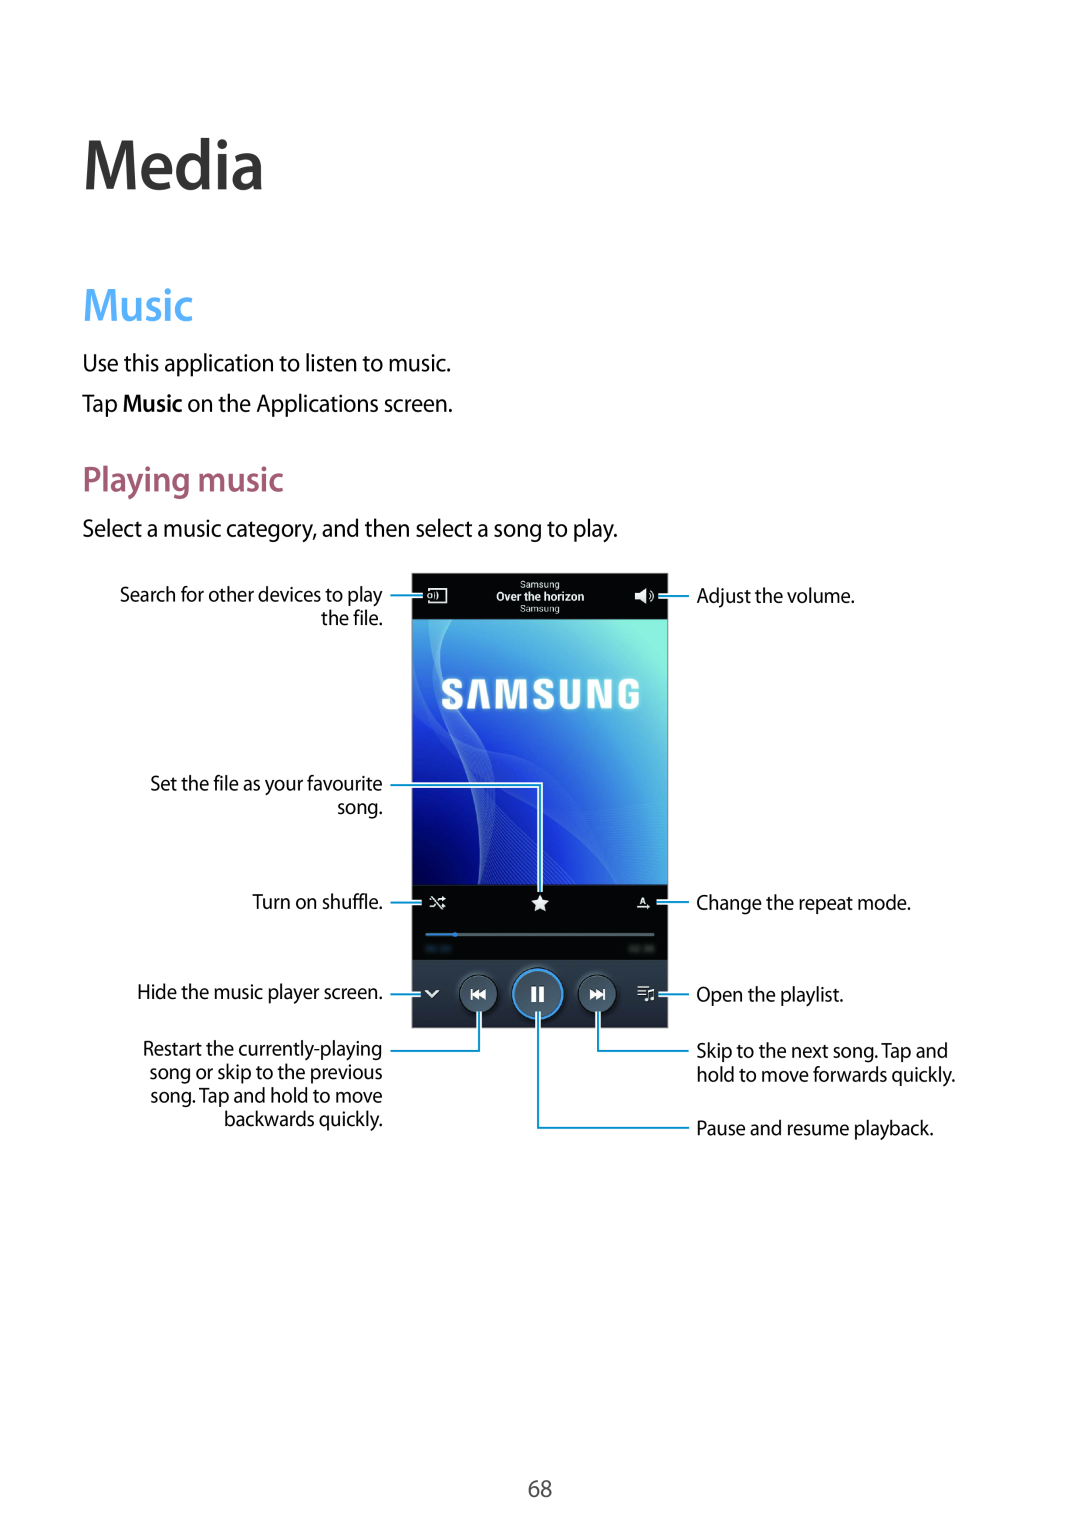 Samsung GT-I9305OKDCNX manual Media, Music, Playing music, the file, song, Turn on shuffle, Change the repeat mode 